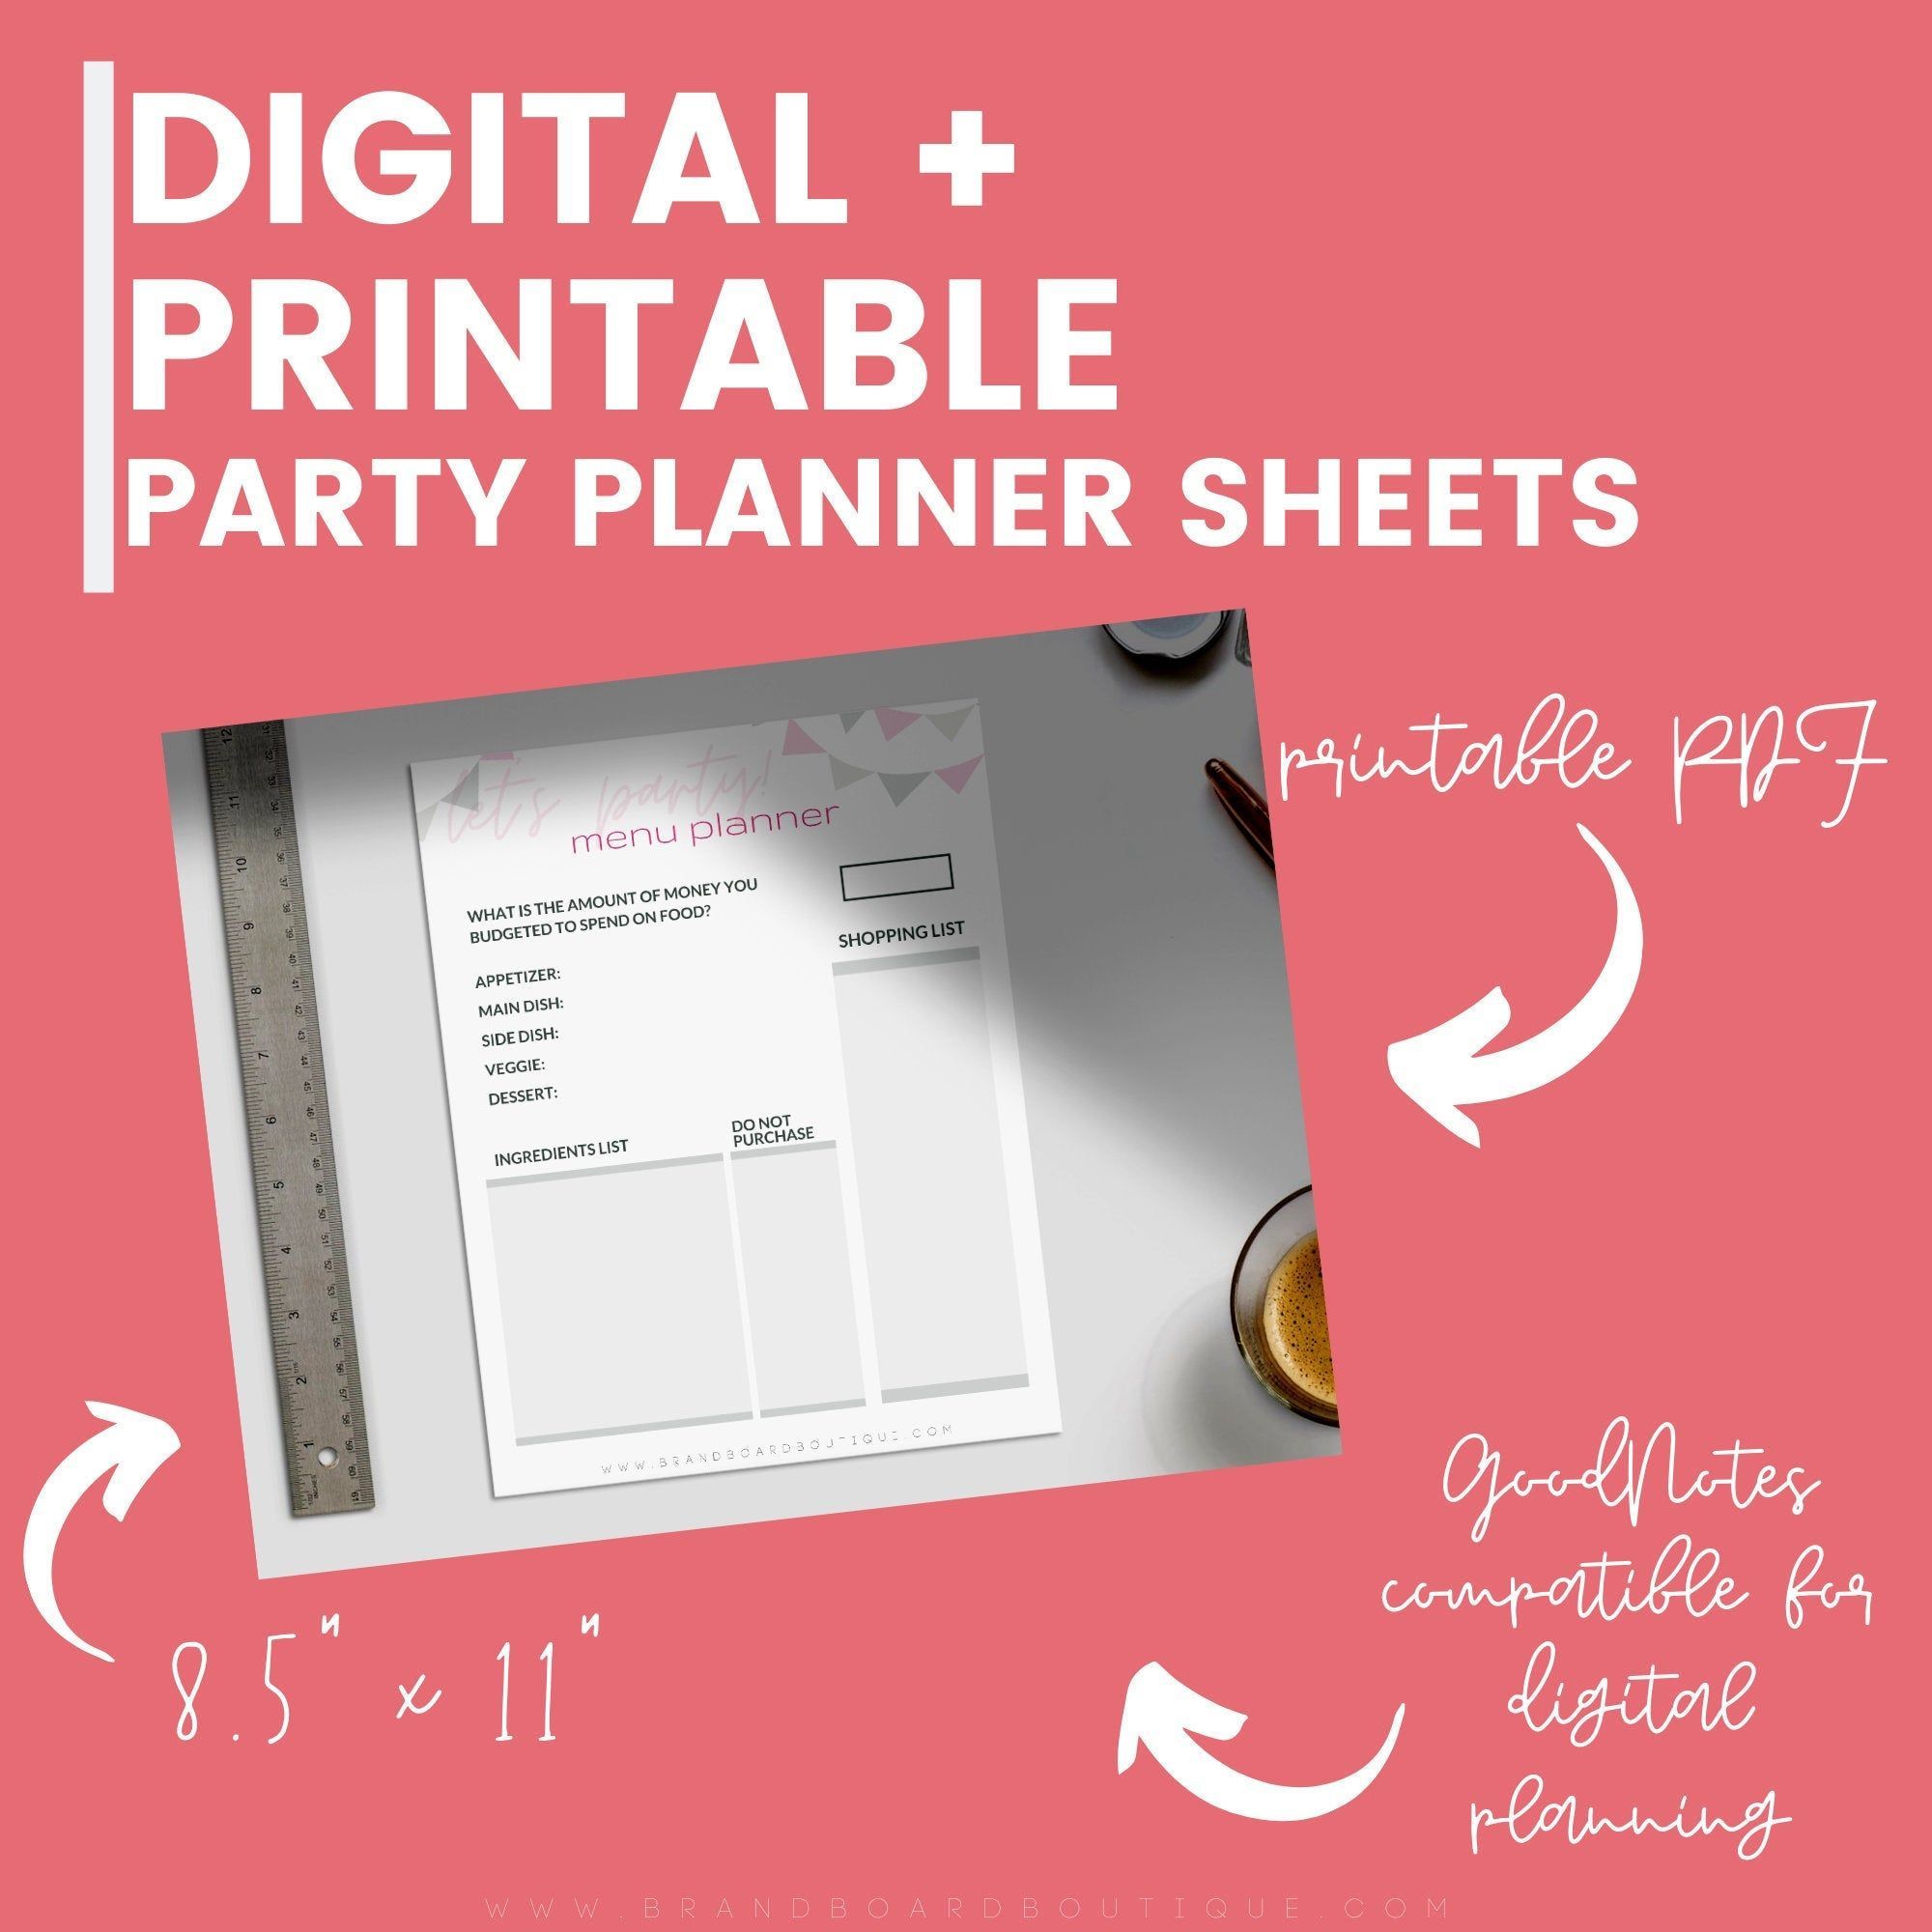 Event Planning Sheets // Party Planning Sheet // Party Budget Worksheet // Party Checklist -   7 Event Planning Sheet party planners ideas